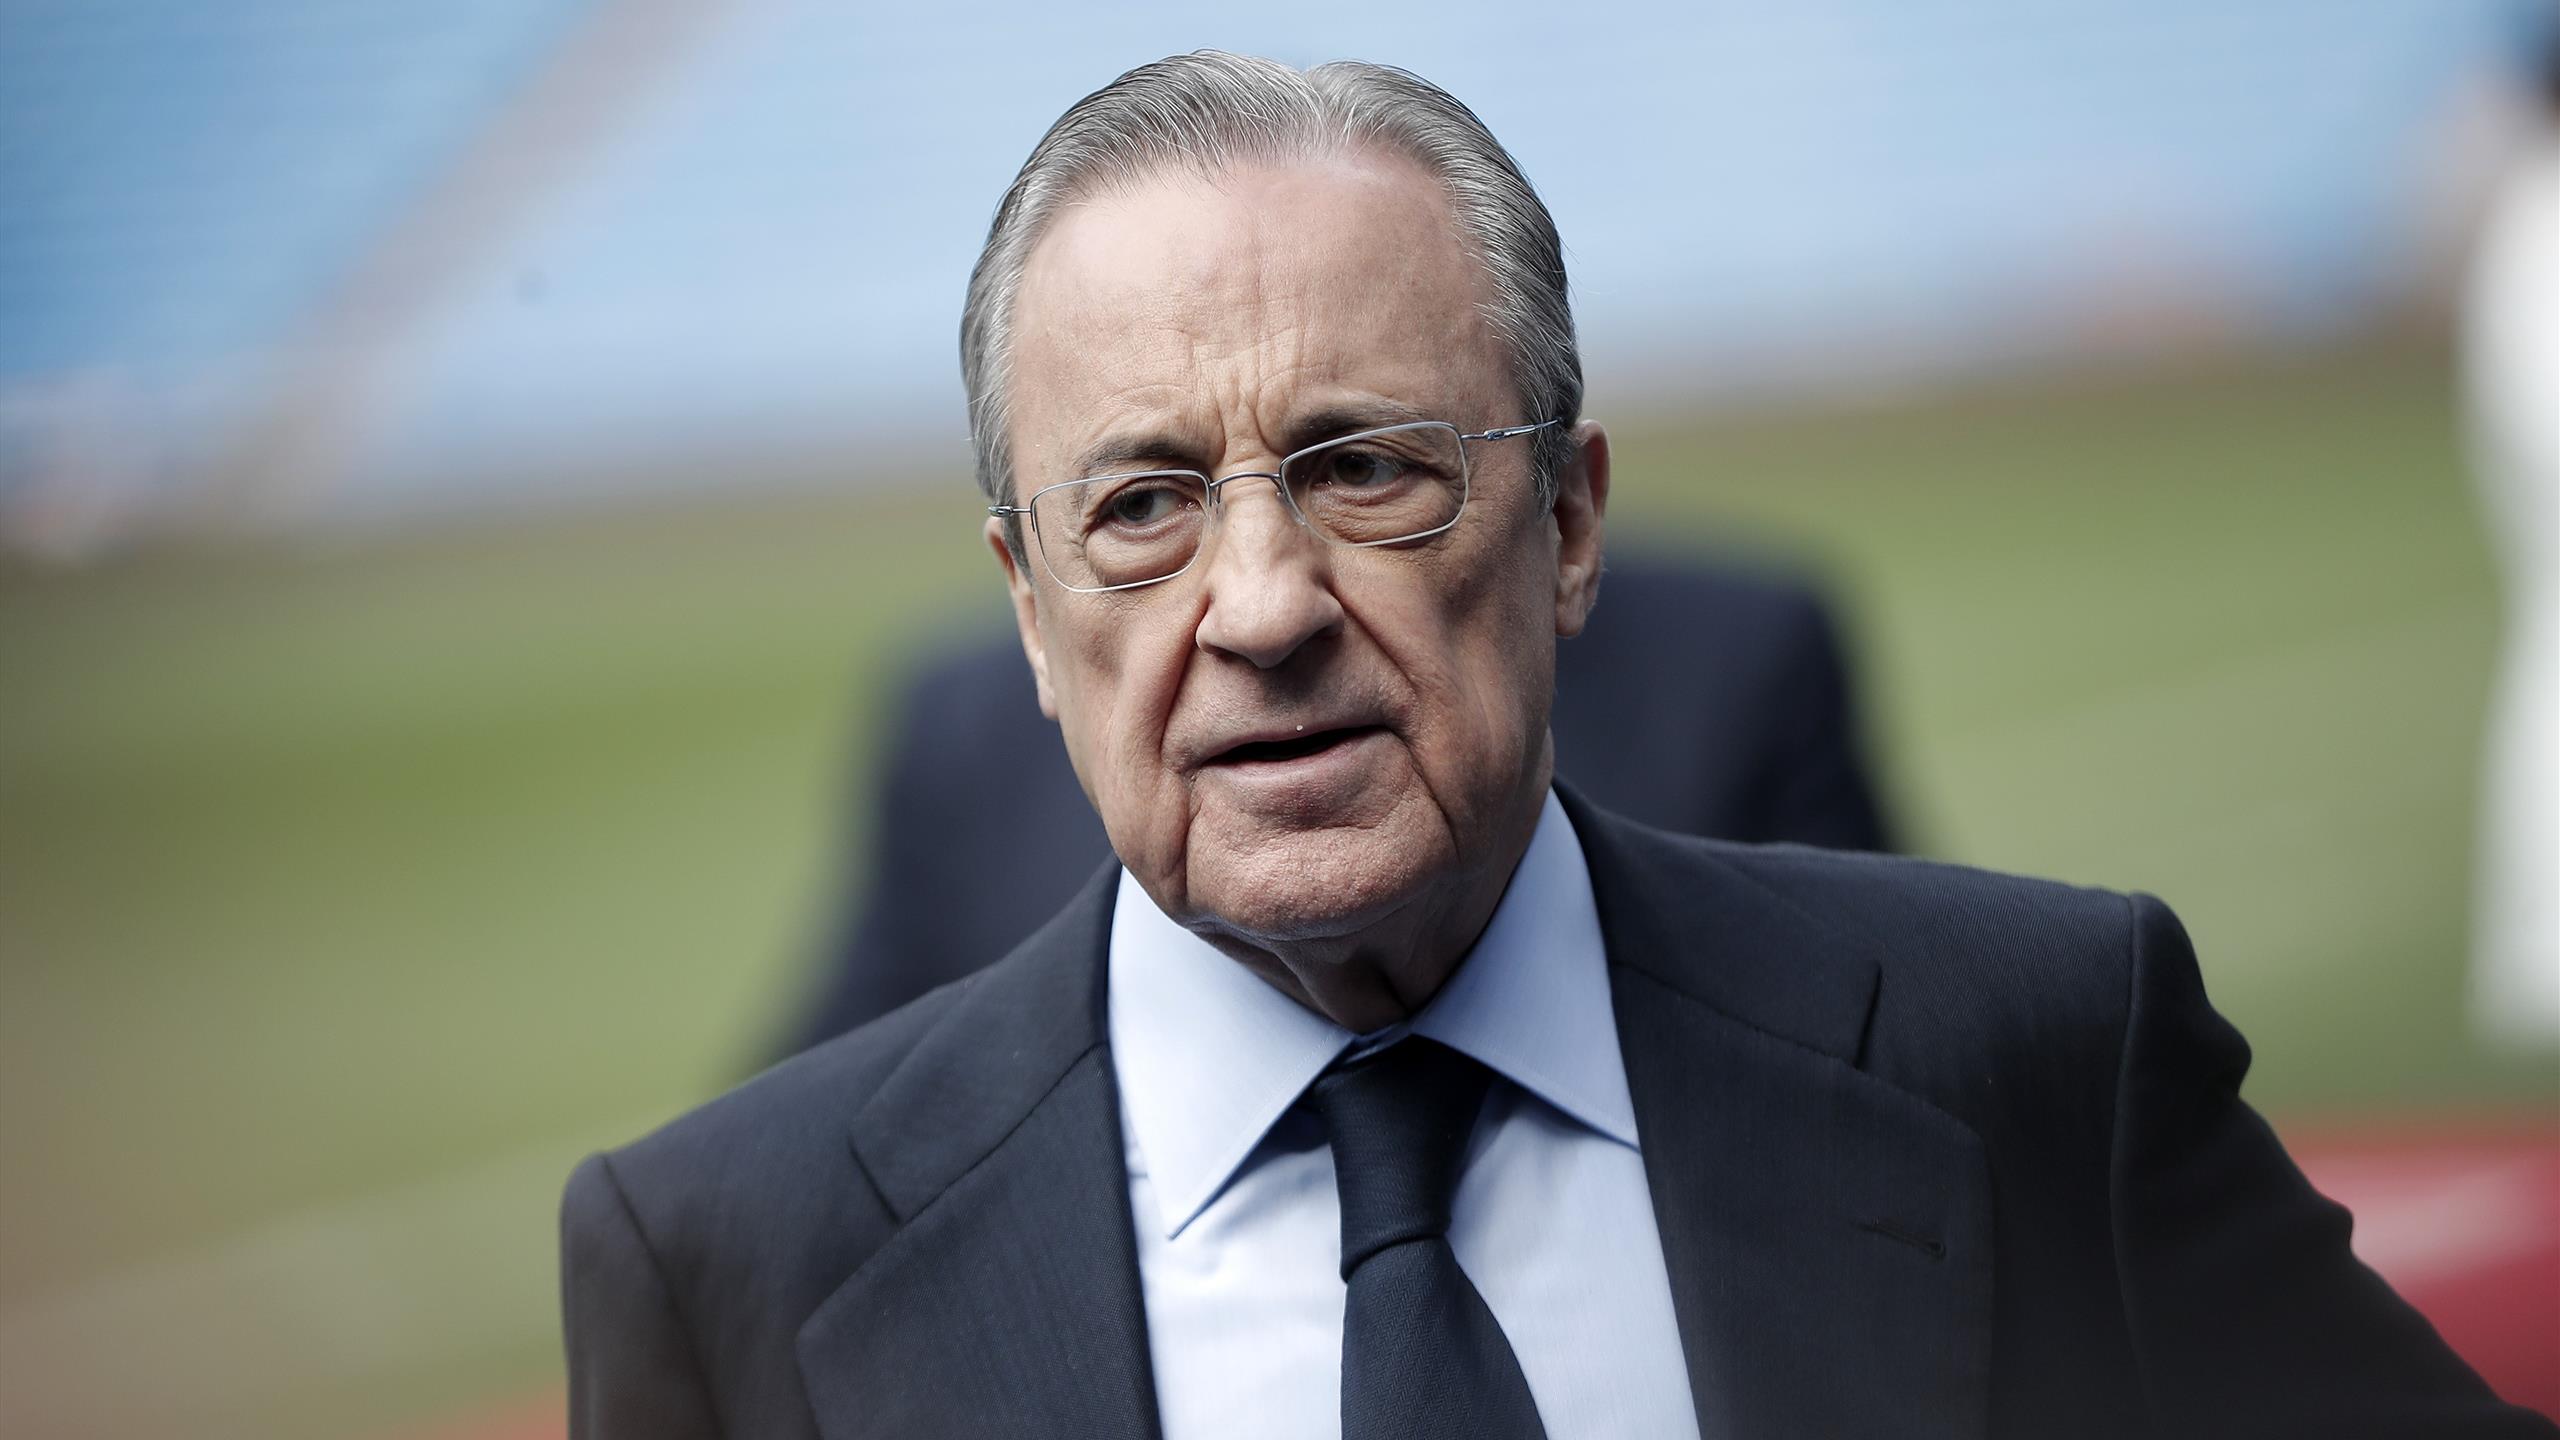 Super League Florentino Pérez (Real Madrid), The Project Is On Stand By